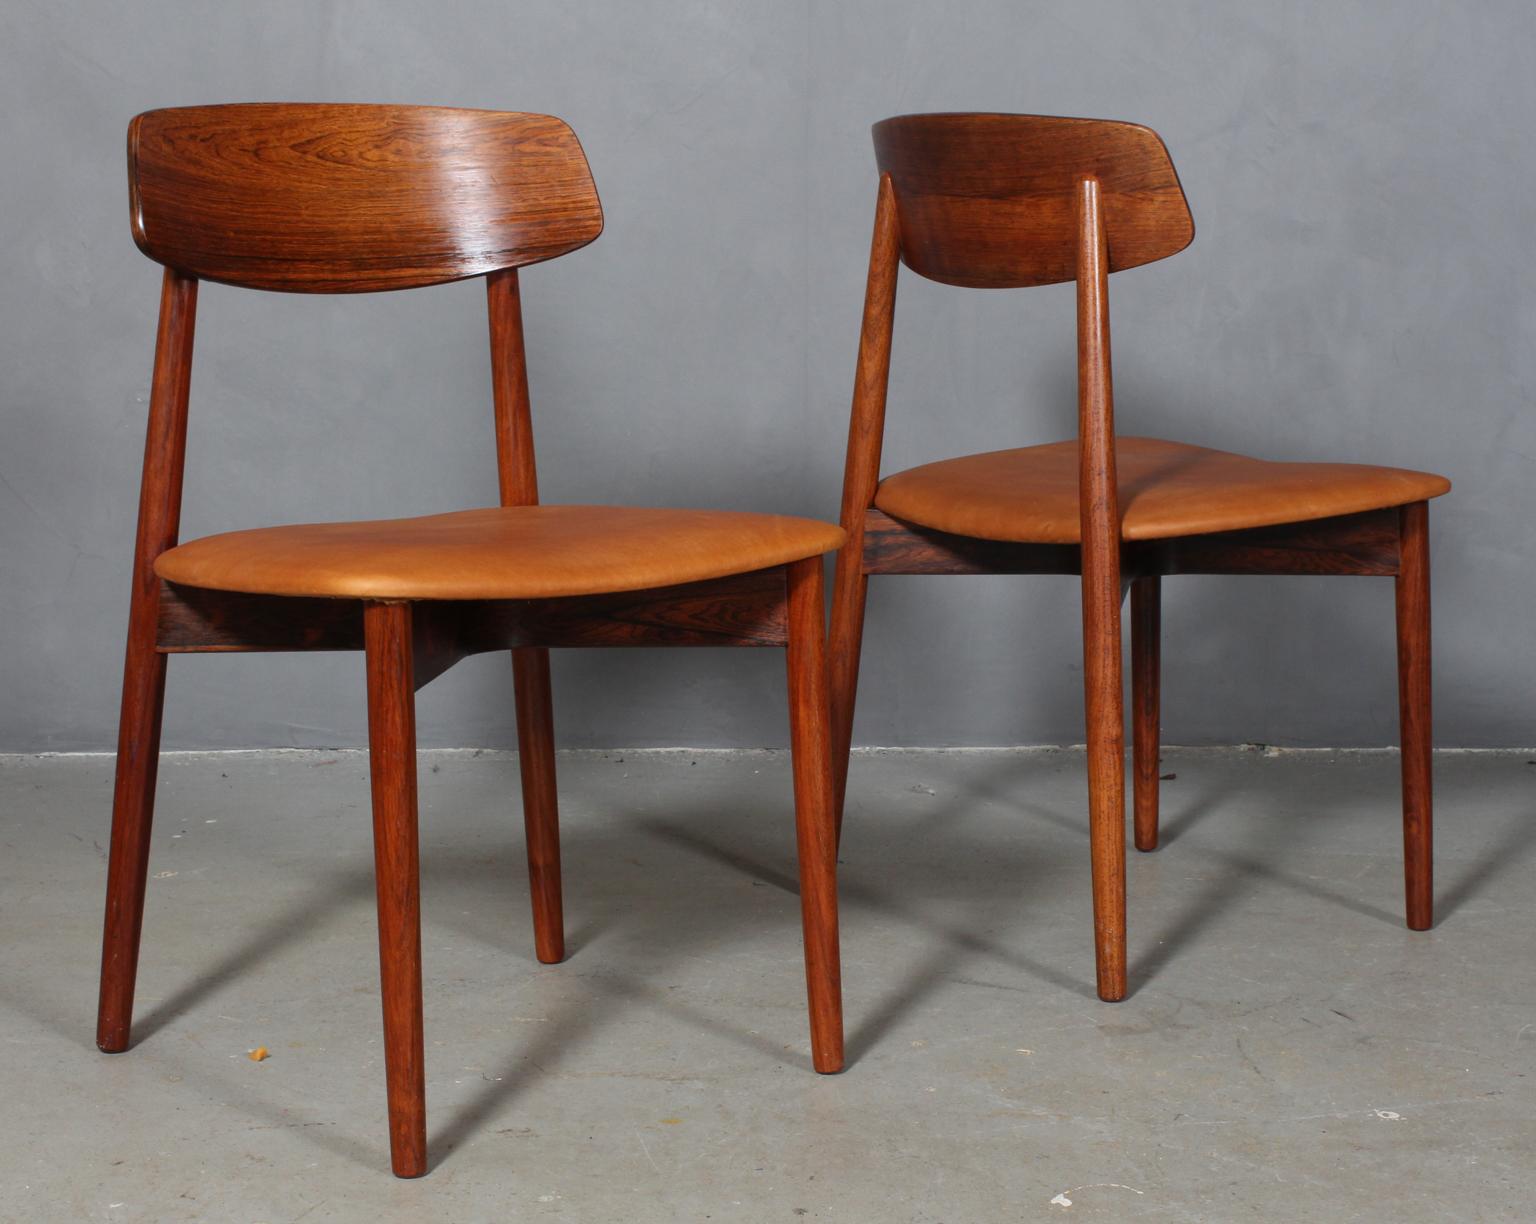 Danish Harry Østergaard, four Chairs in Rosewood and Tan Aniline Leather, 1970s